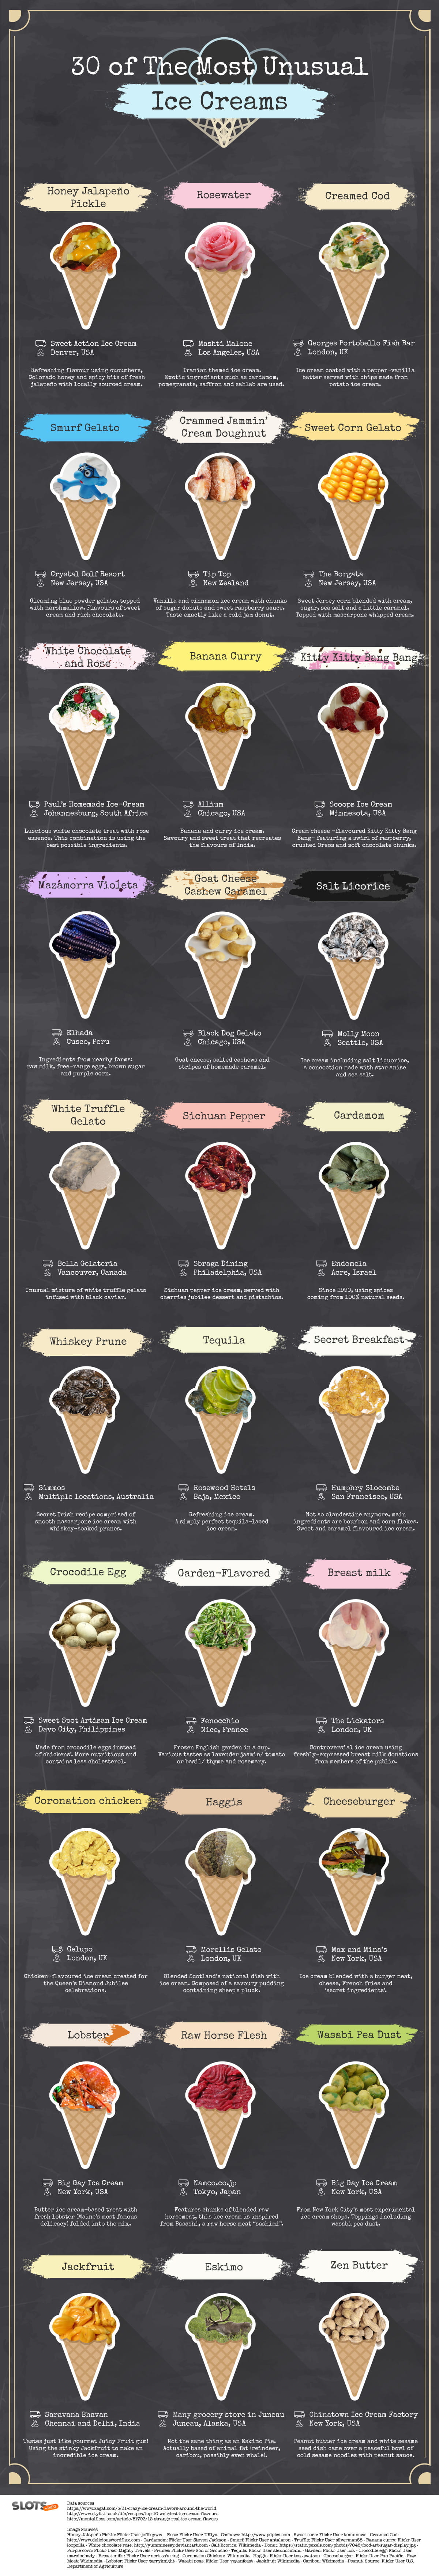 30 of the Most Unusual Ice Creams infographic